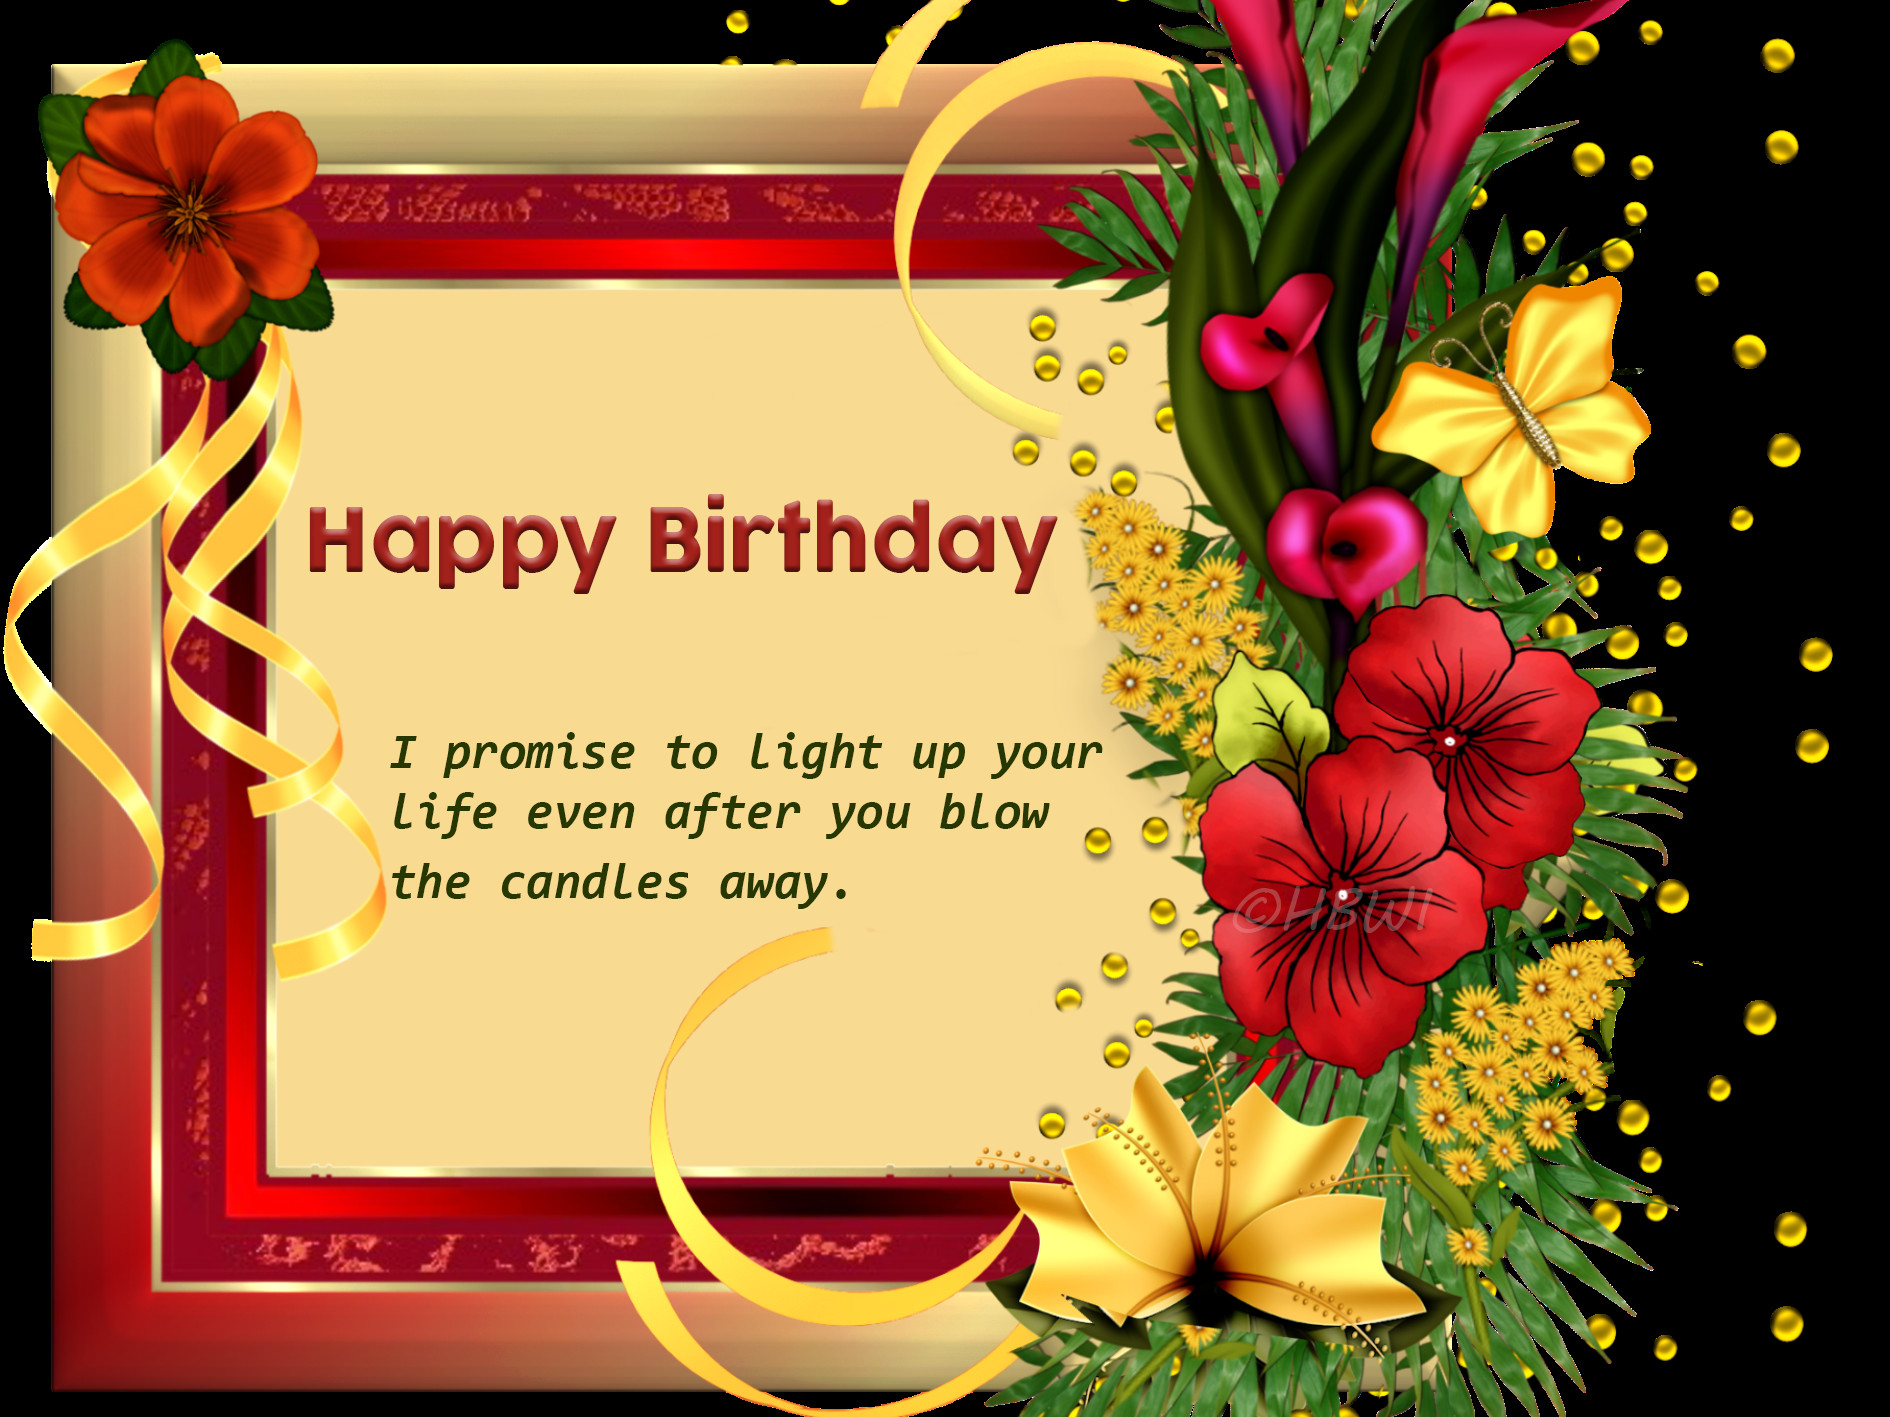 Happy Birthday Wishes Card
 All new Exclusive 25 HD Happy Birthday Wishes 2018